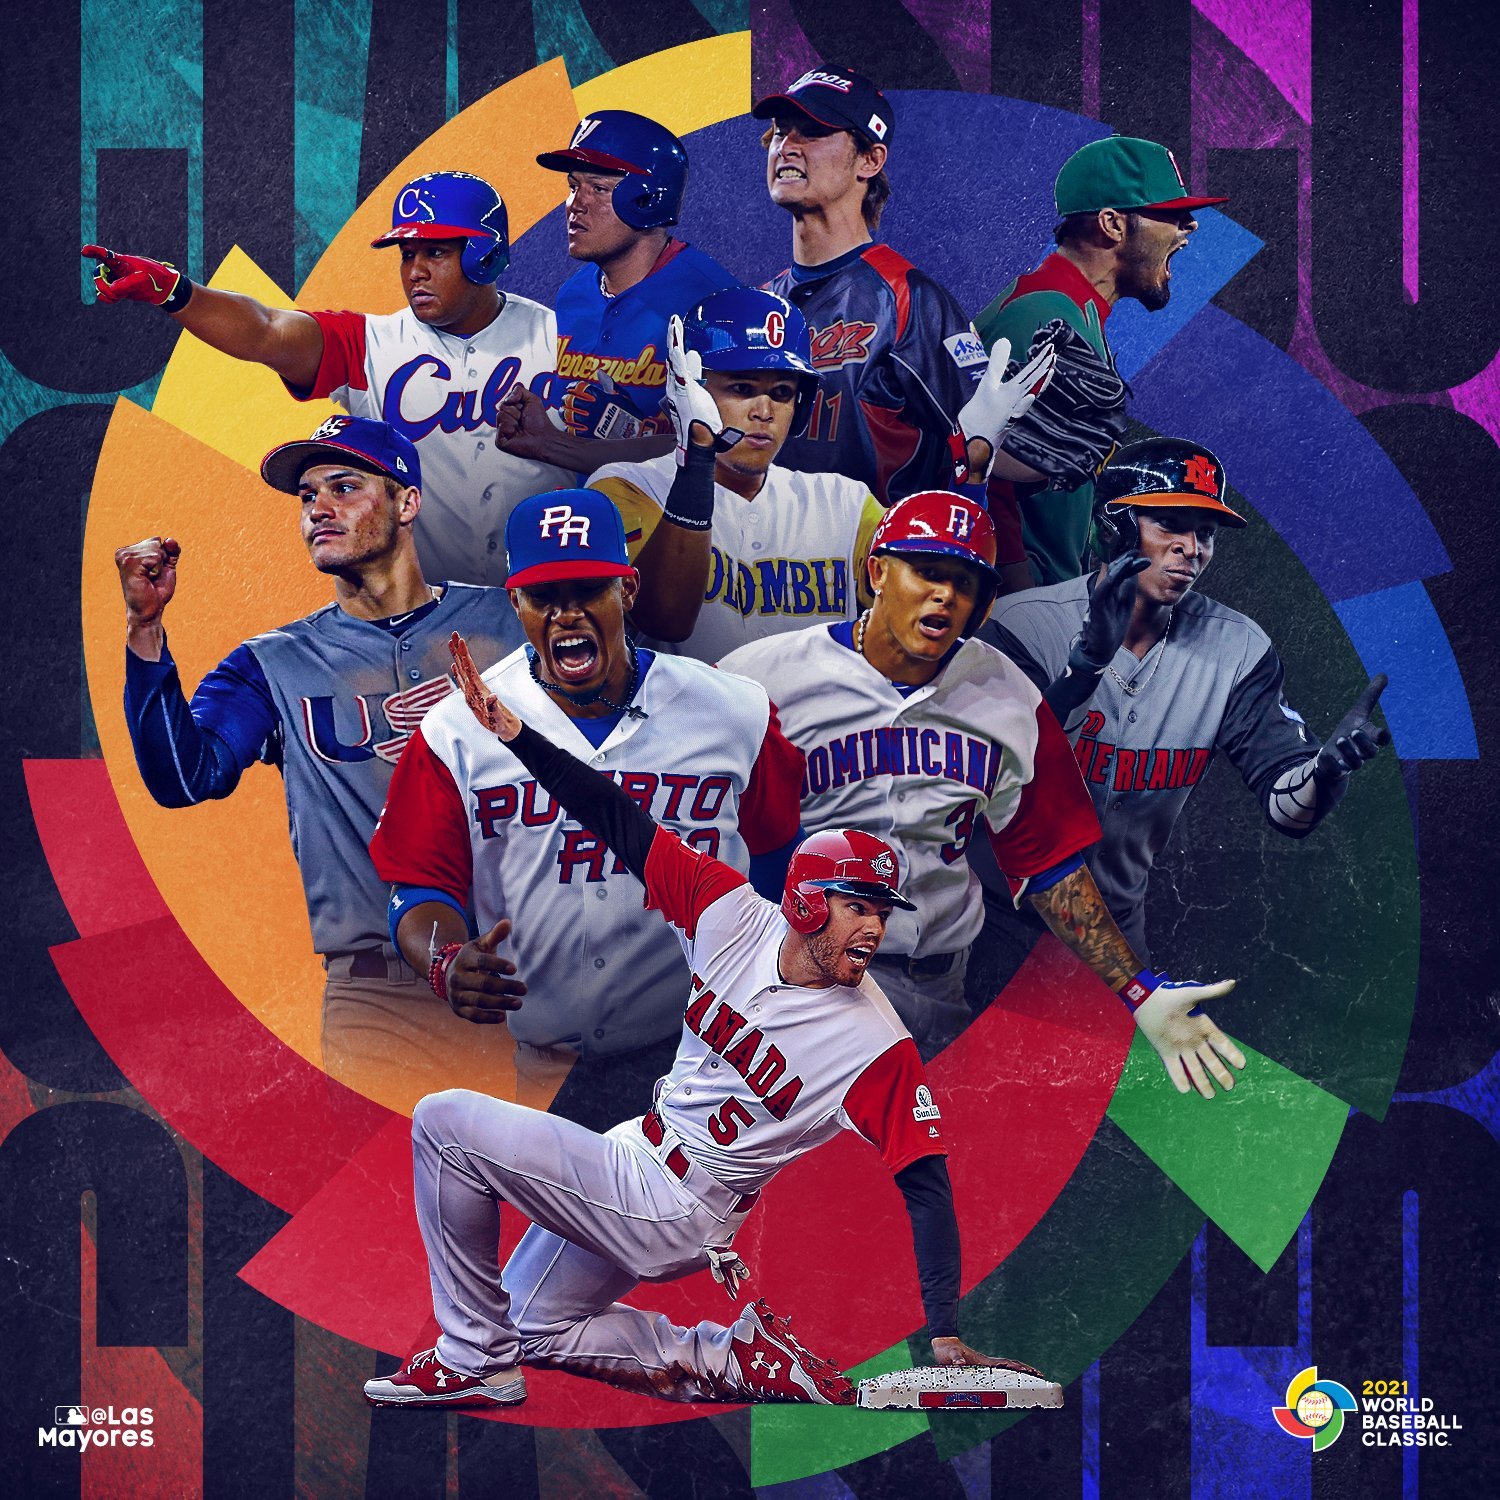 World Baseball Classic are only 365 days away from the 2021 World Baseball Classic! RT if you're excited